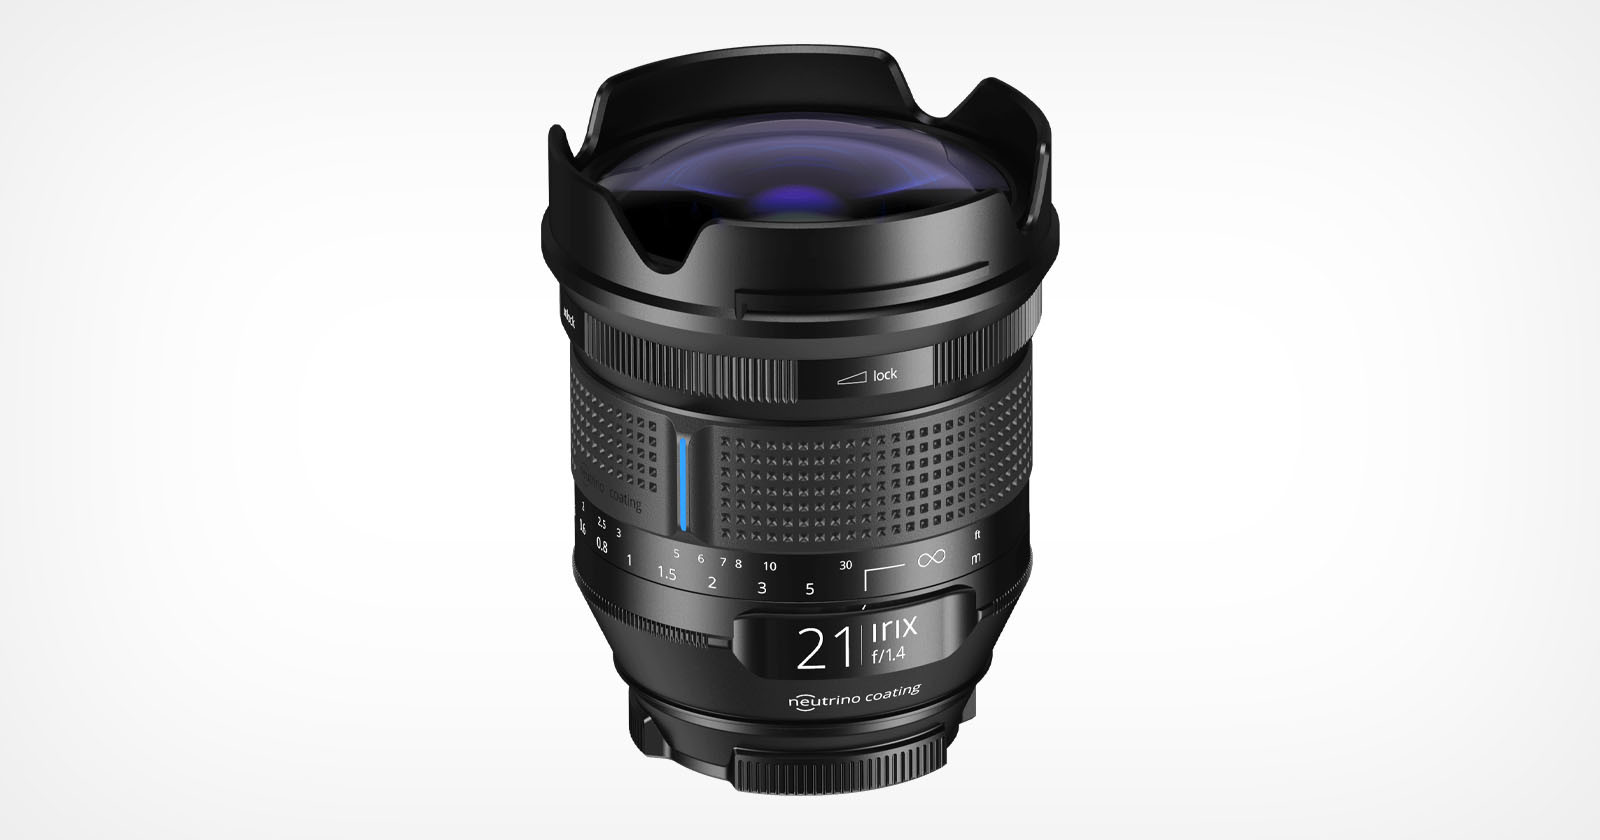 Irix Unveils a 21mm f/1.4 for Canon EF, Nikon F, and Pentax K Mounts